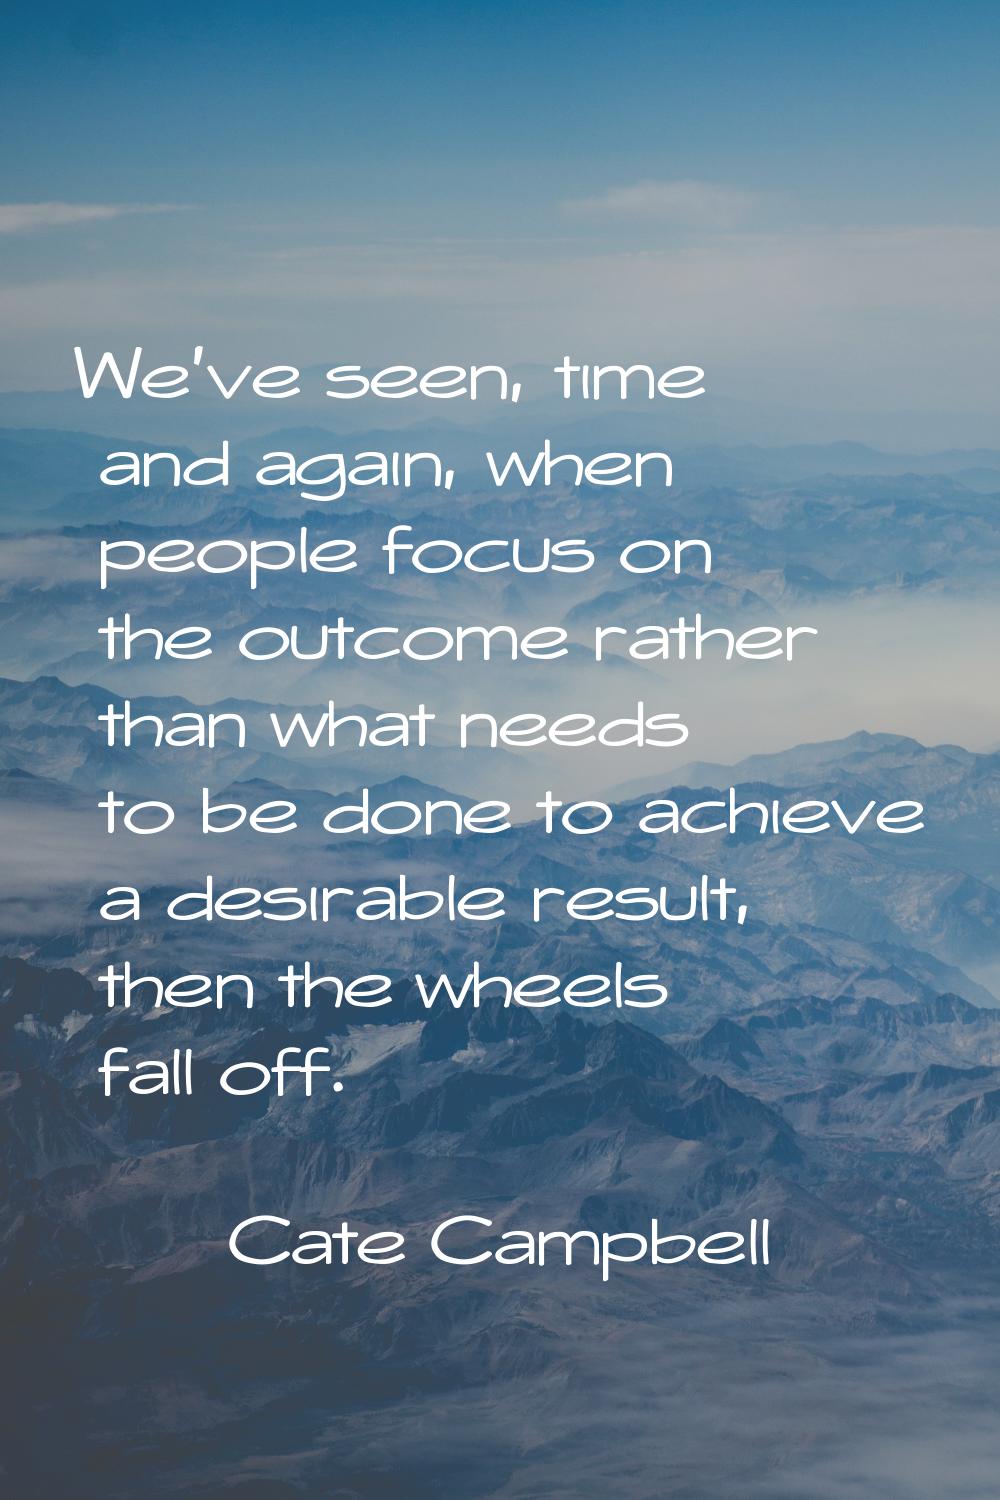 We've seen, time and again, when people focus on the outcome rather than what needs to be done to a